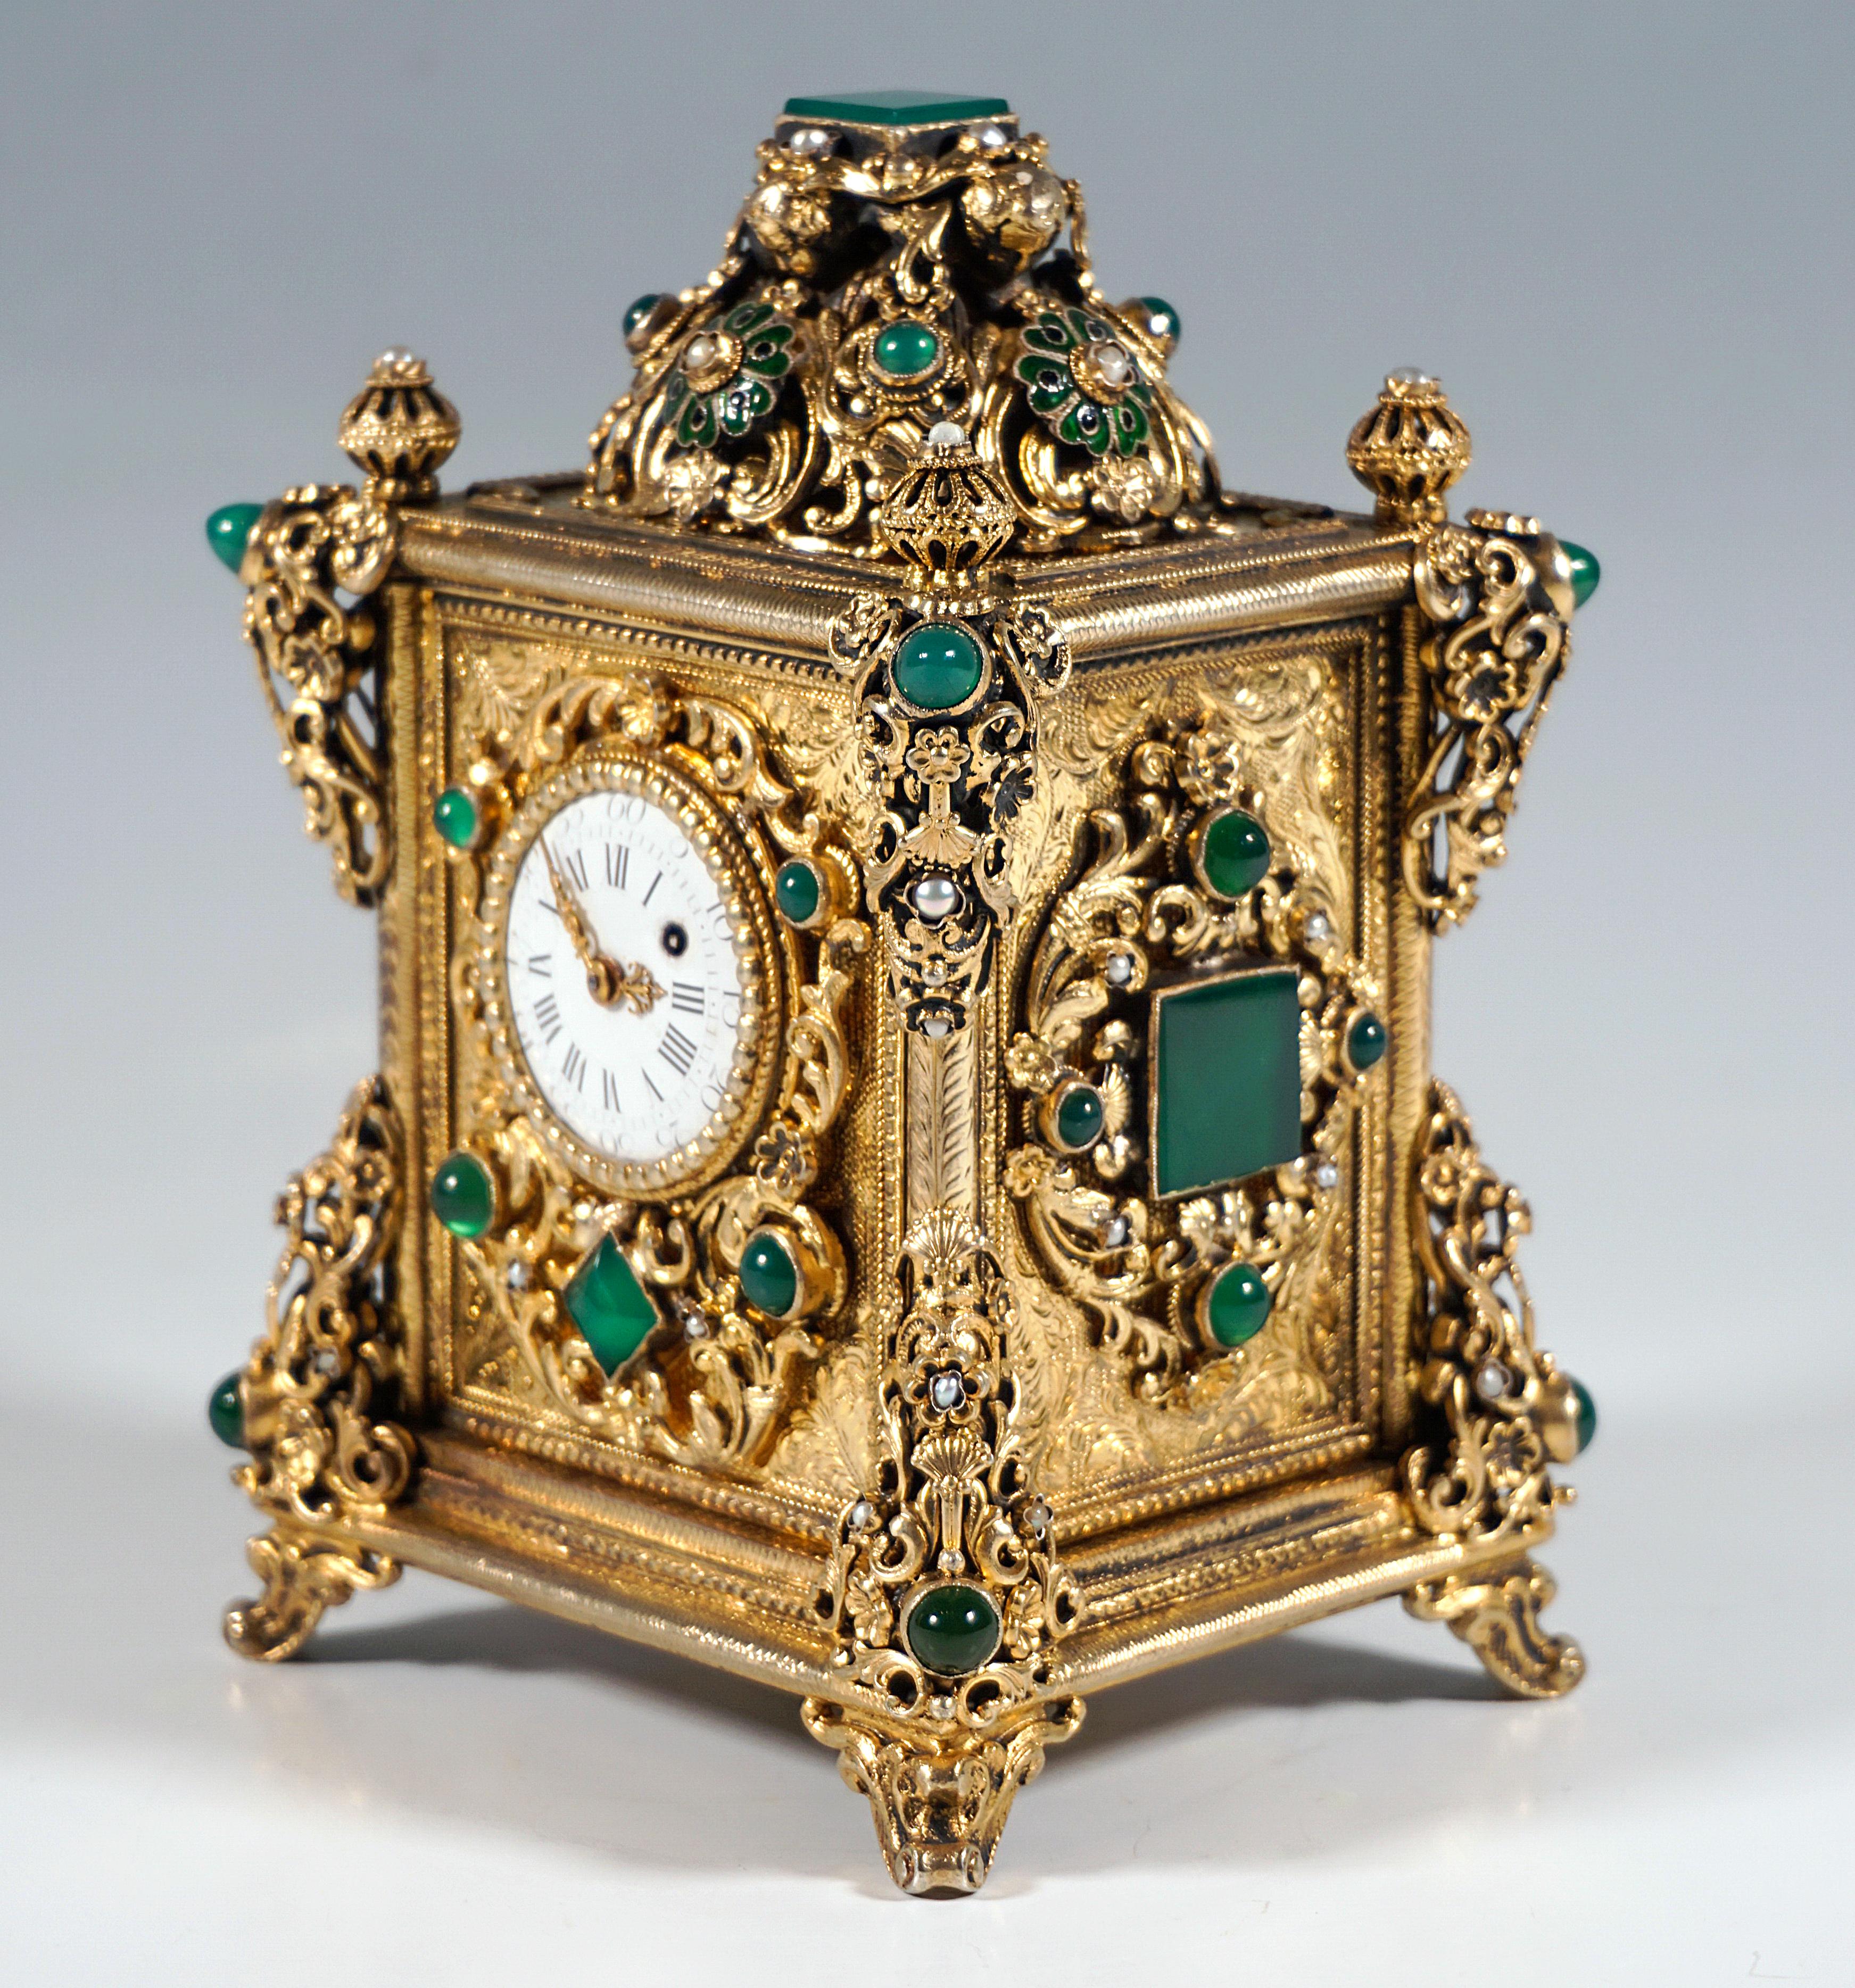 Austrian Viennese Gilt Silver Splendid Table Clock With Green Chalcedony Trimming, C 1880